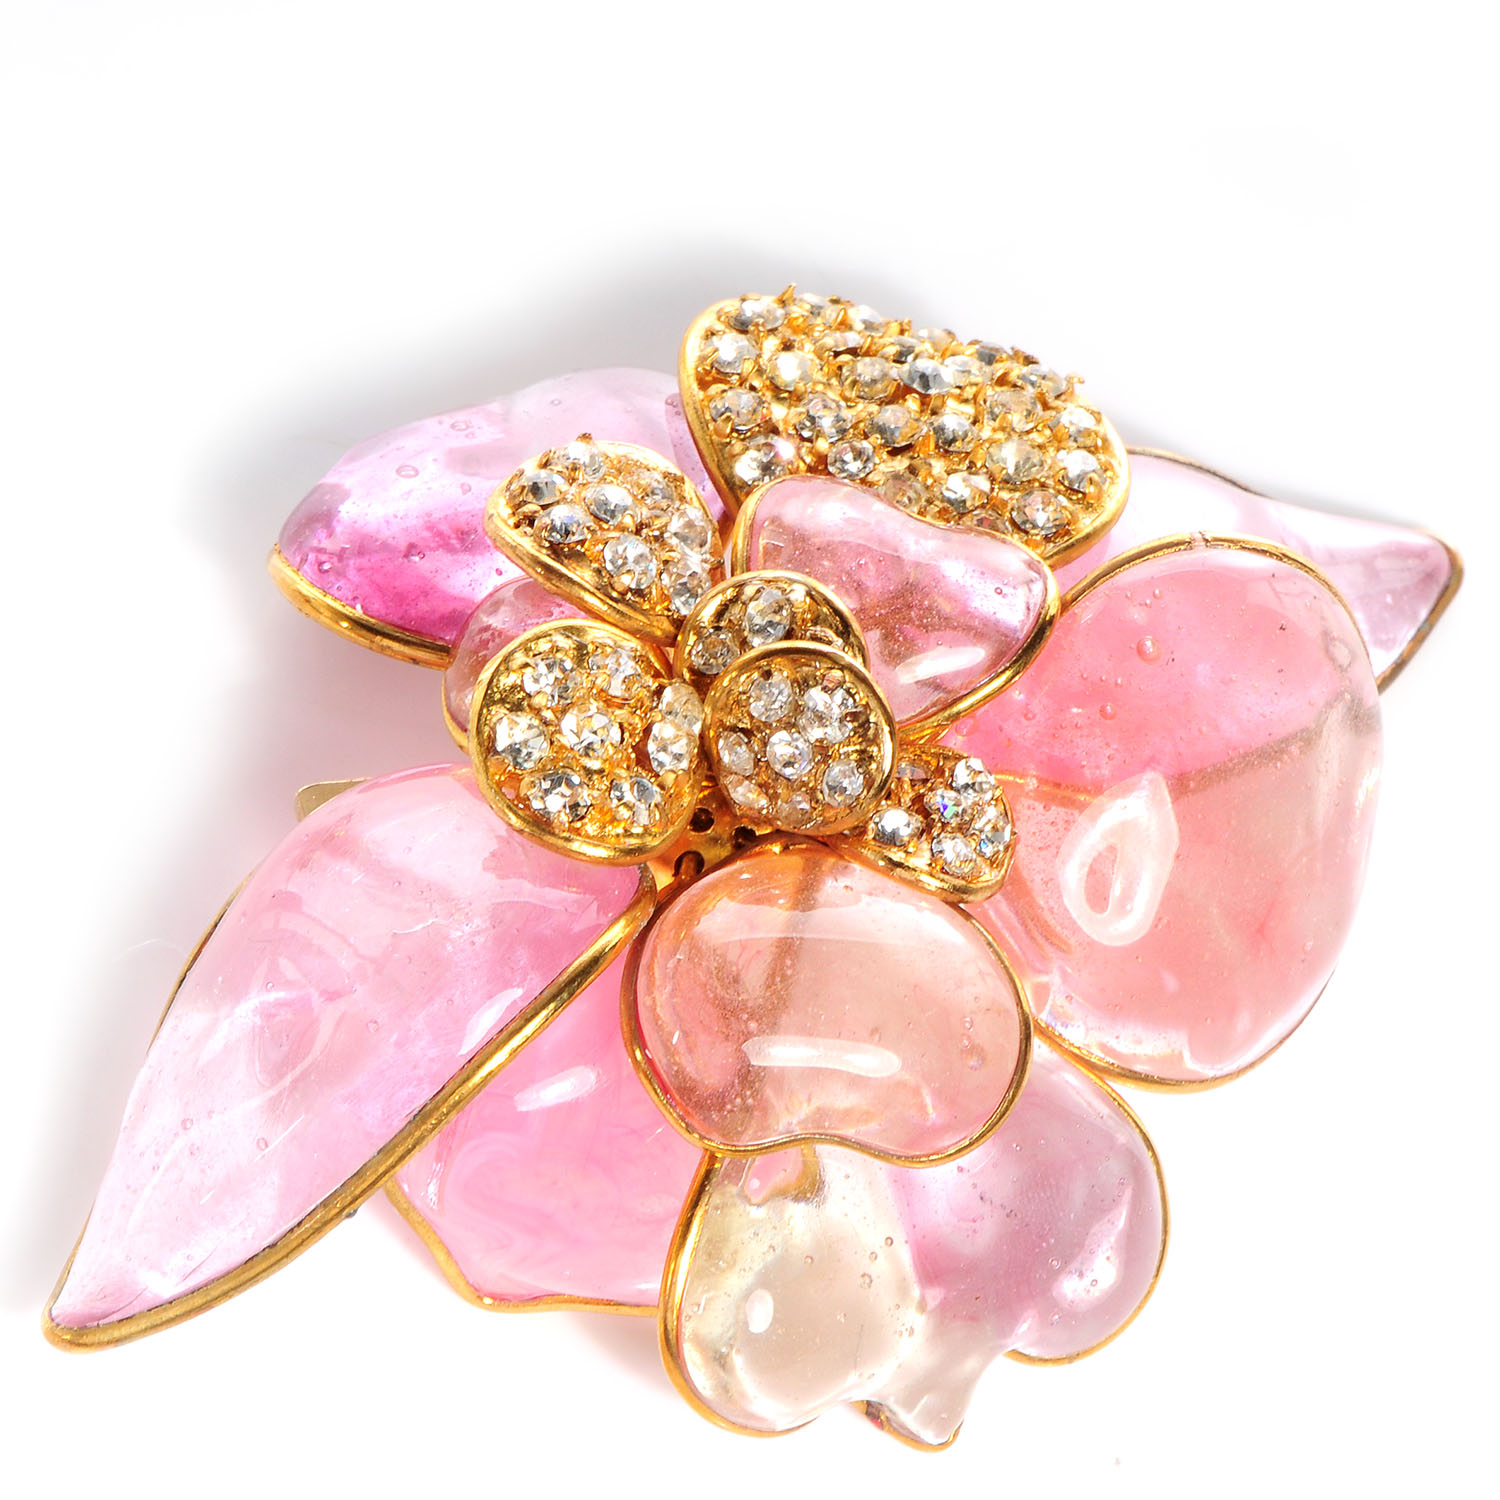 CHANEL Gripoix Poured Glass Crystal Camellia Brooch Gold 69998